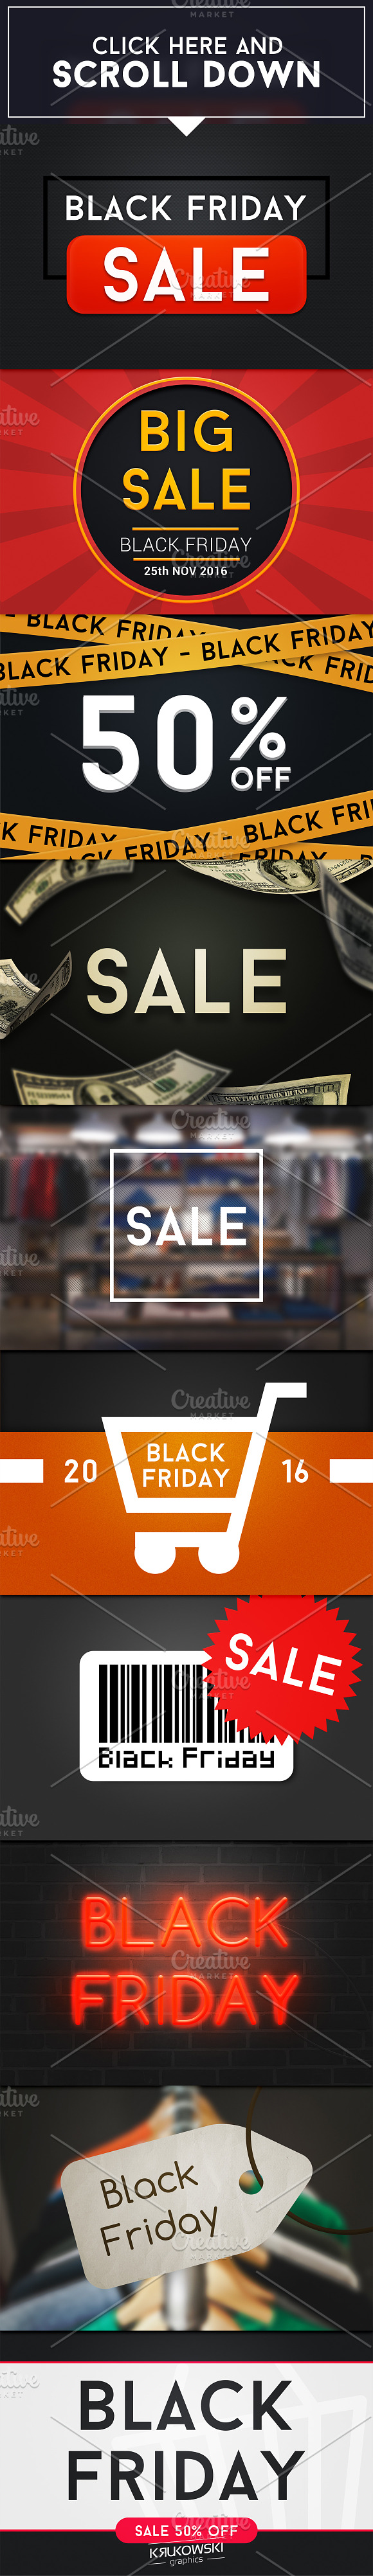 Black Friday PSD Graphics in Textures - product preview 1